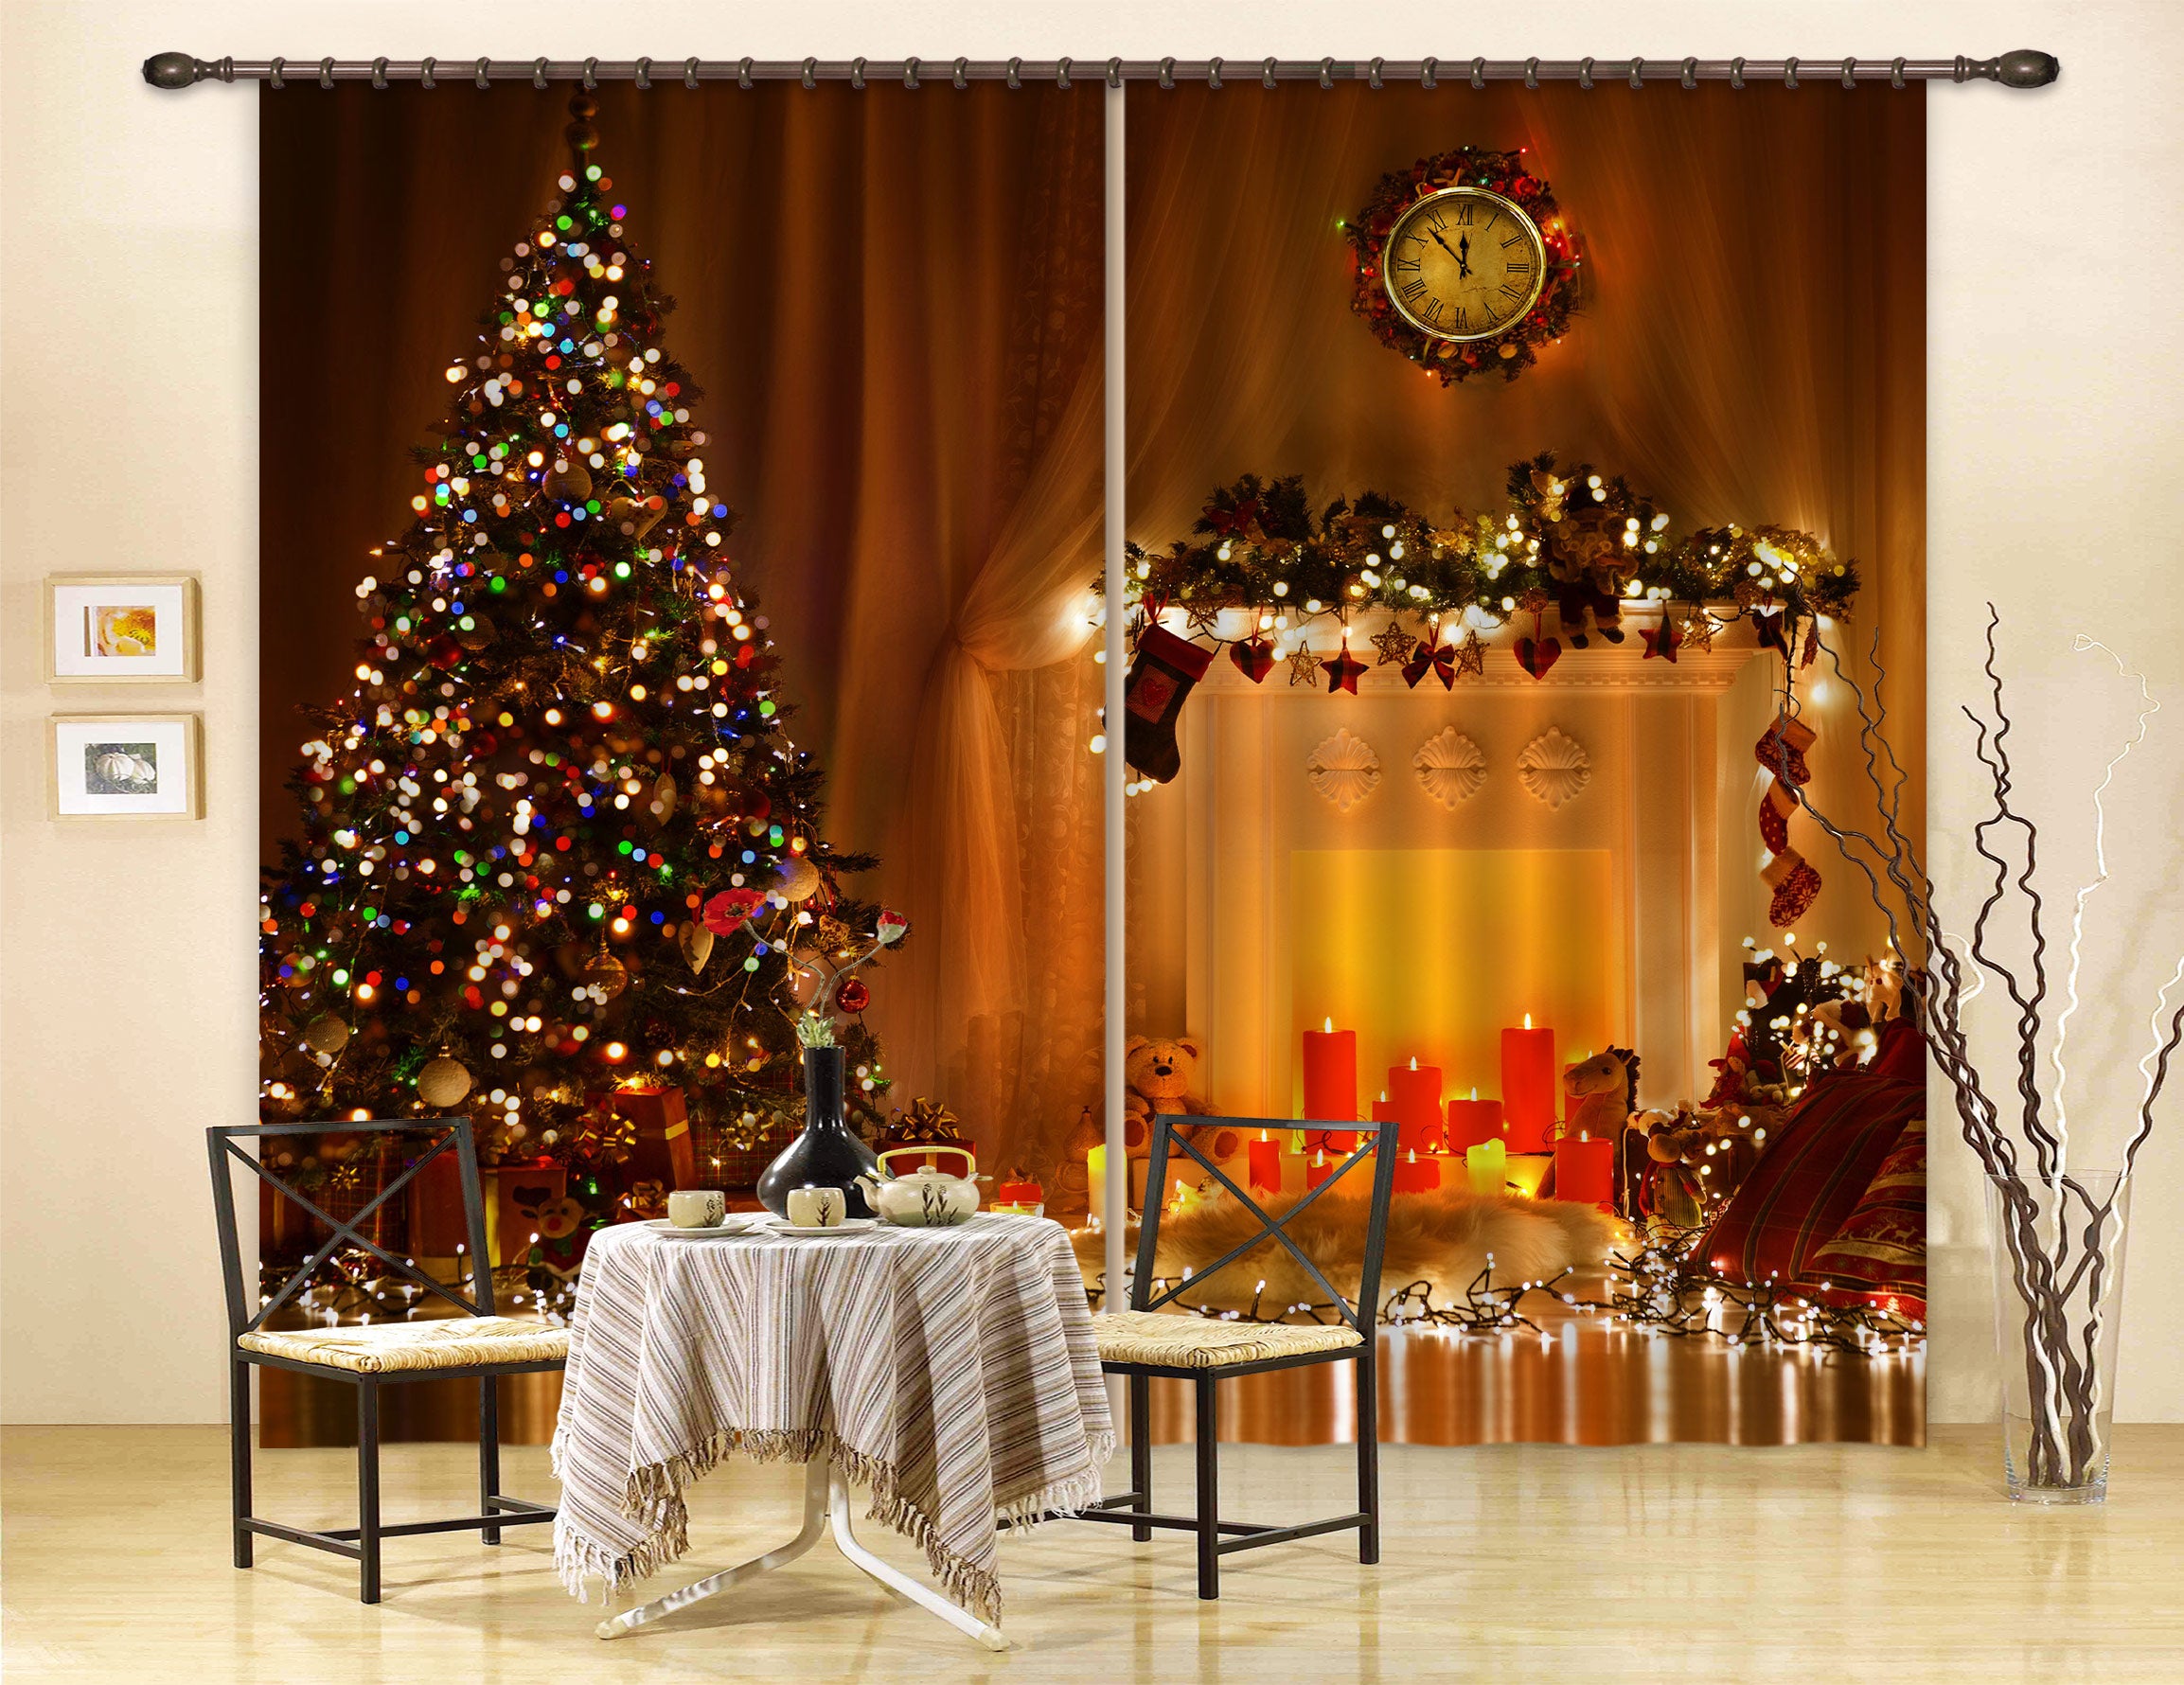 3D Colored Lights Candle Tree 53068 Christmas Curtains Drapes Xmas